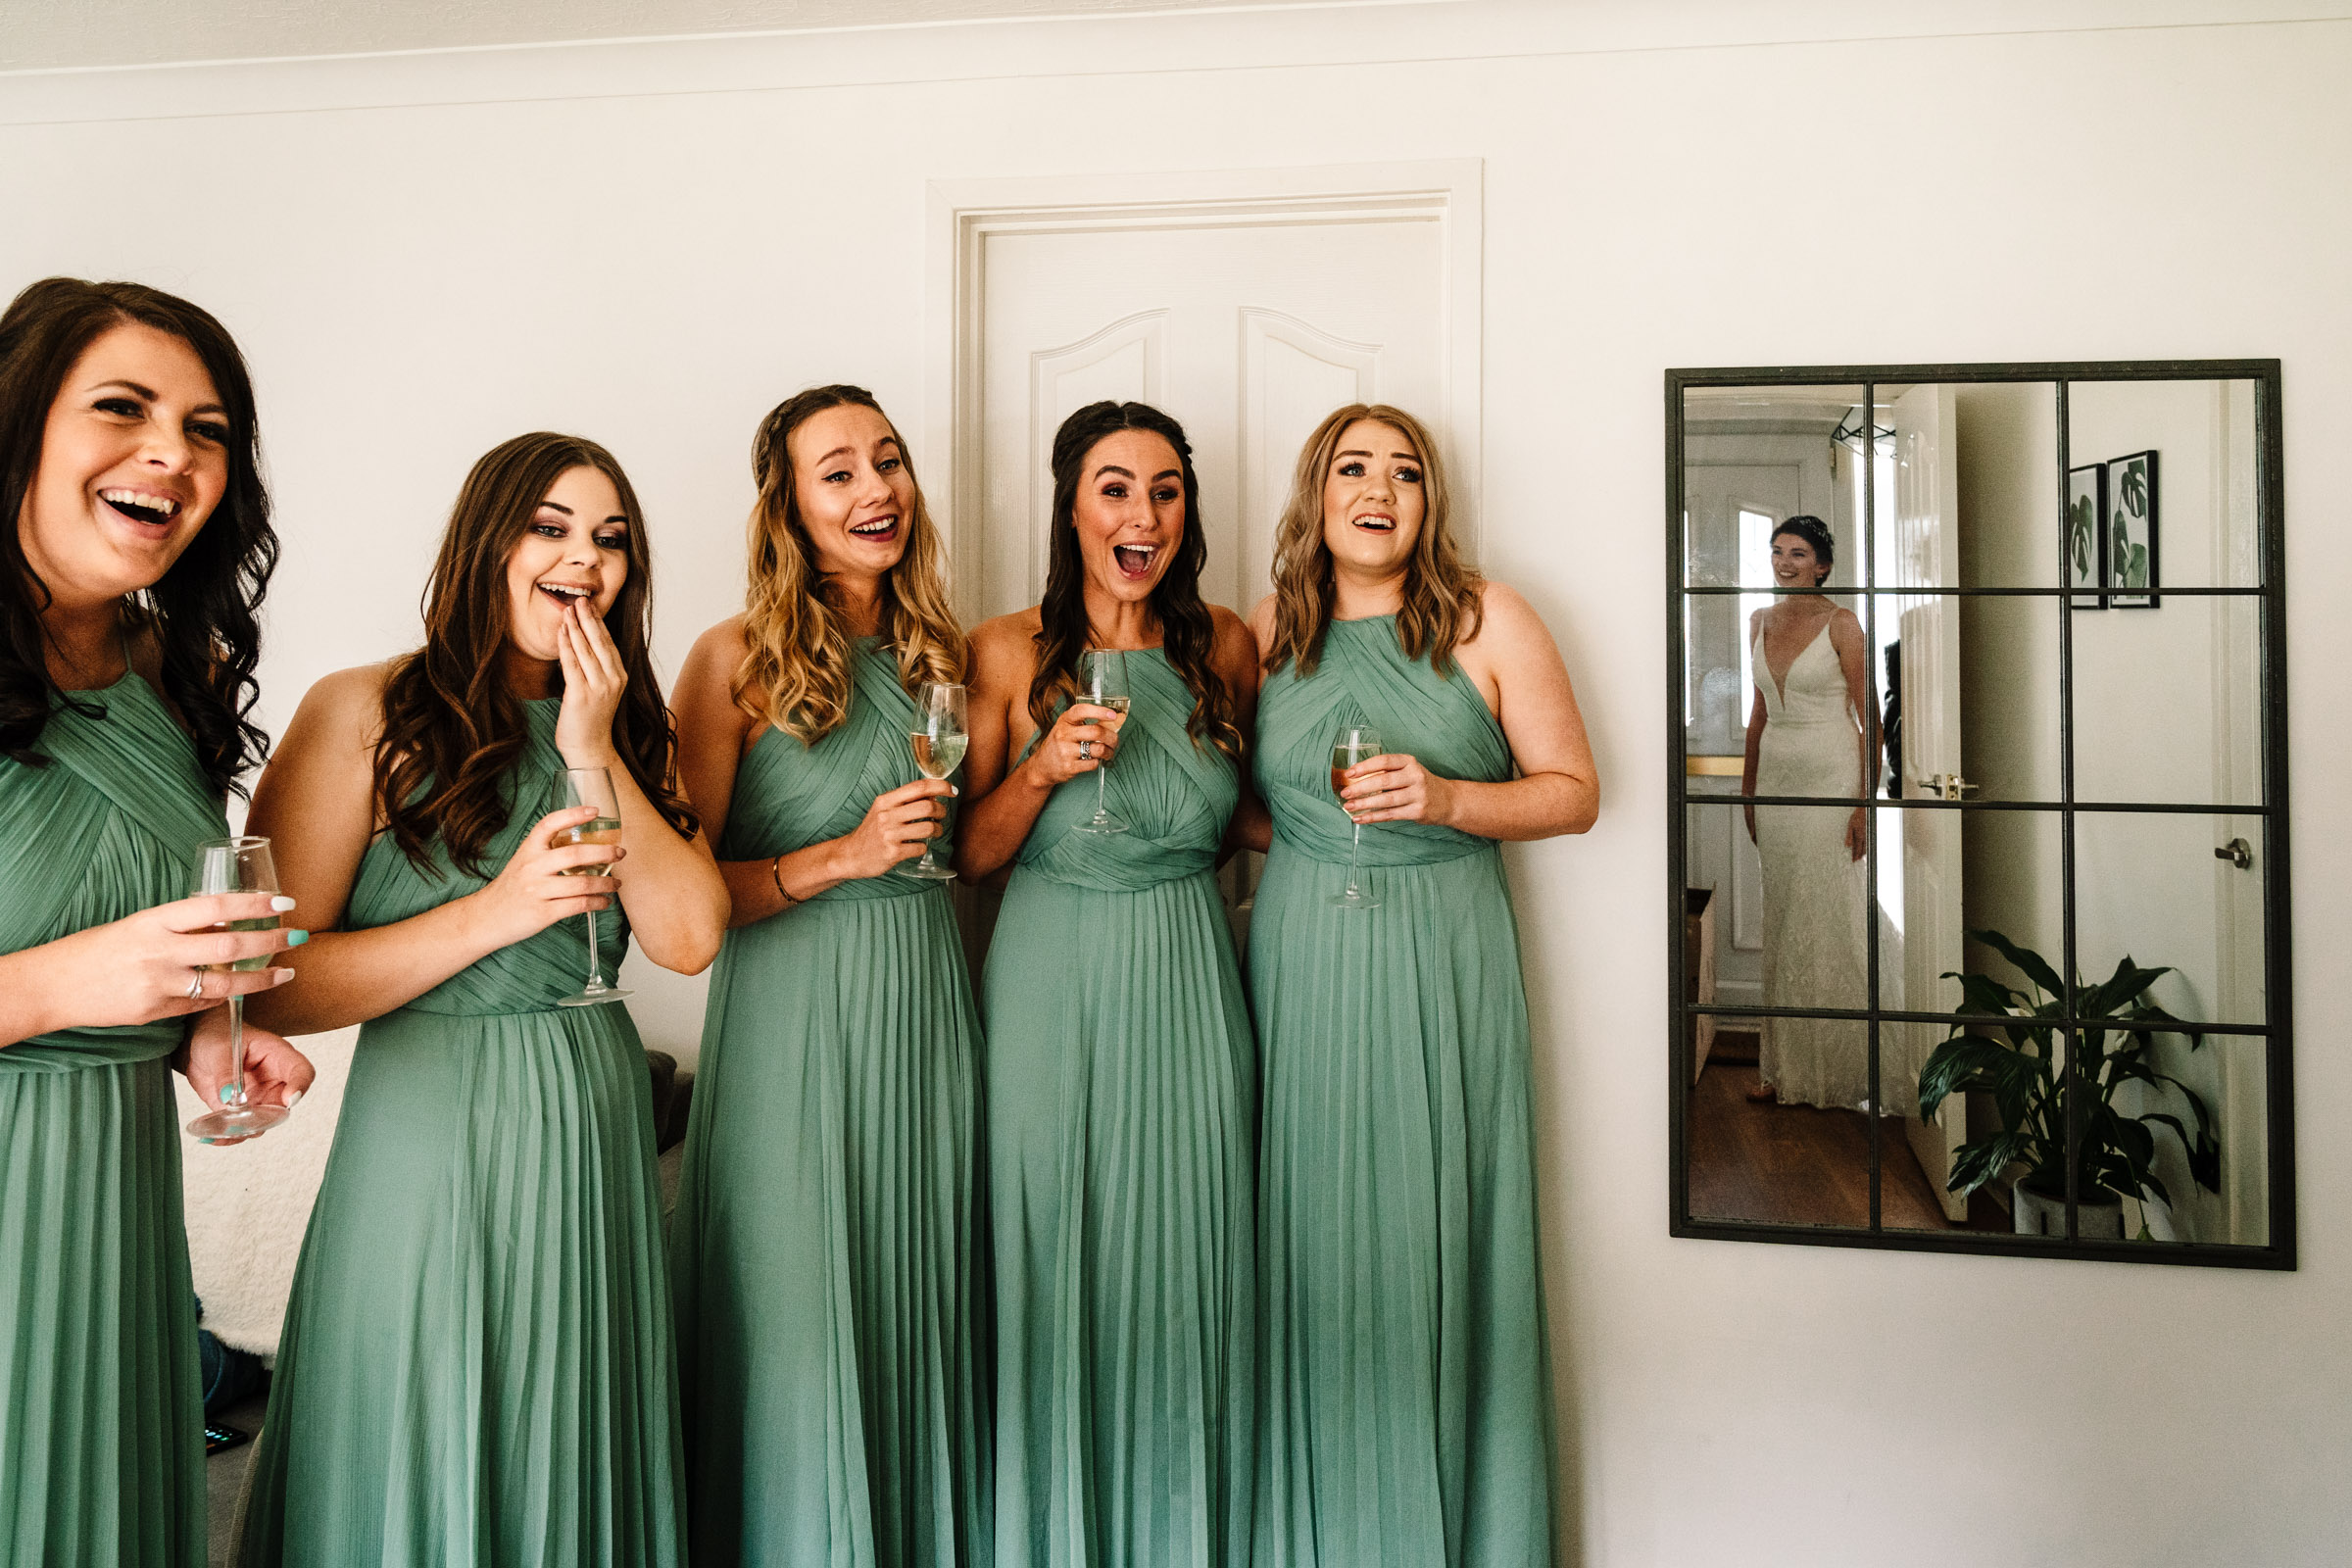 bridesmaids see the bride in her wedding dress for the first time